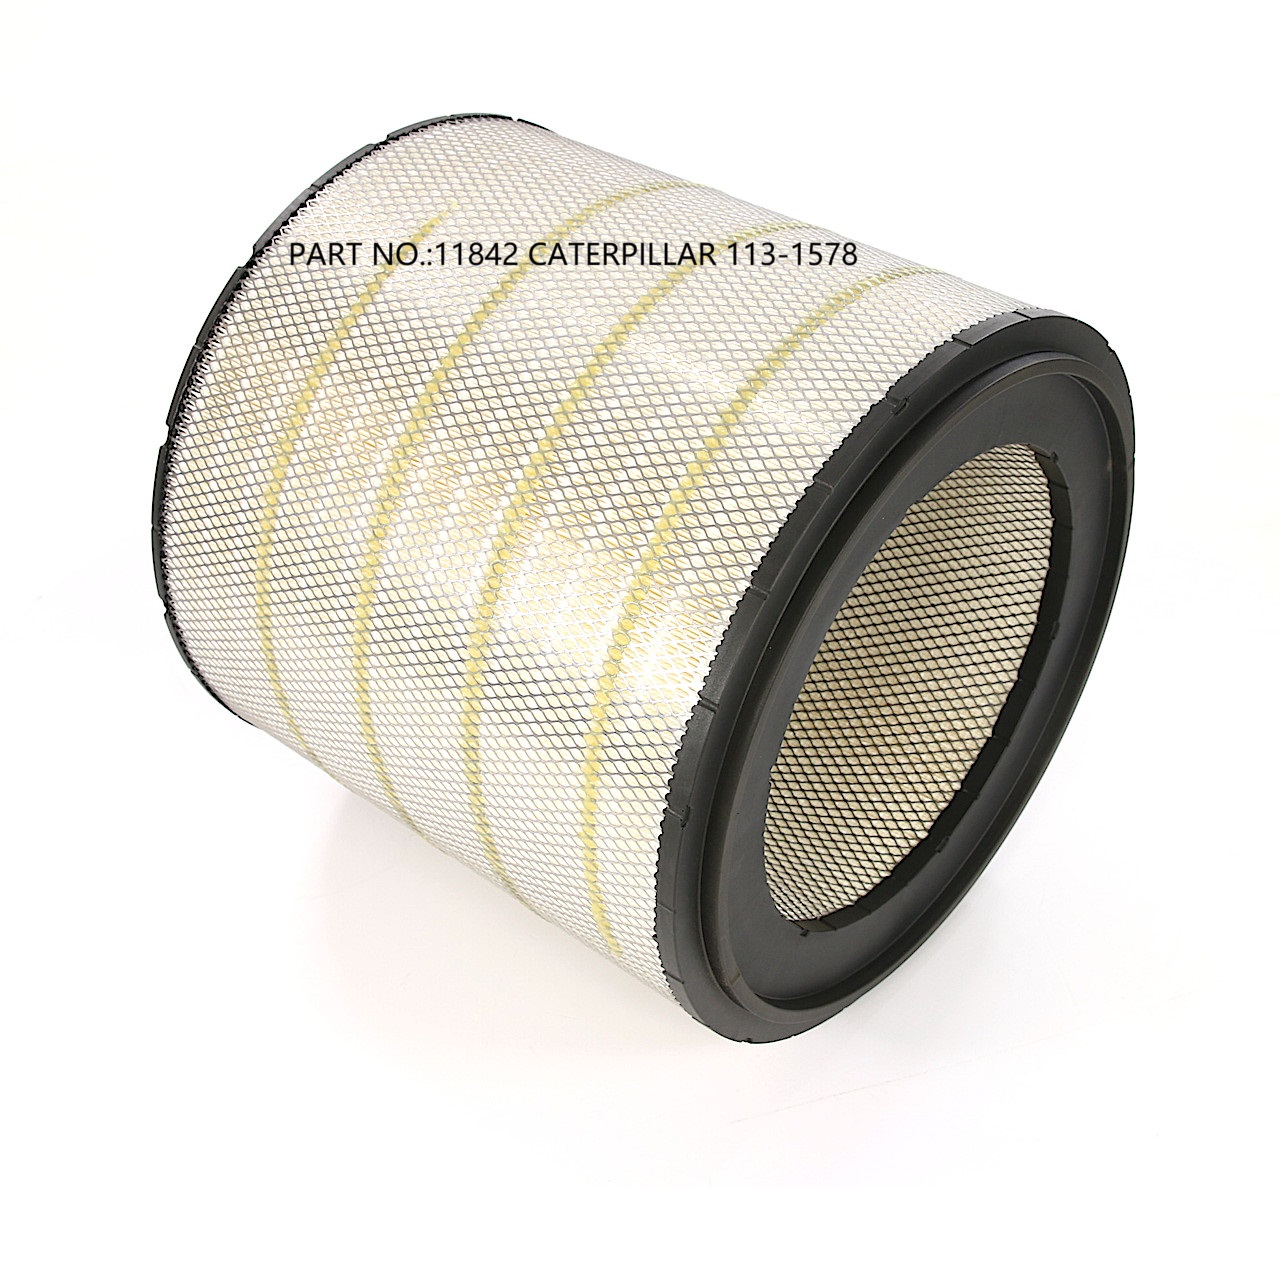 11842 AIR FILTER FOR CATERPILLAR INDUSTRIAL ENGINES